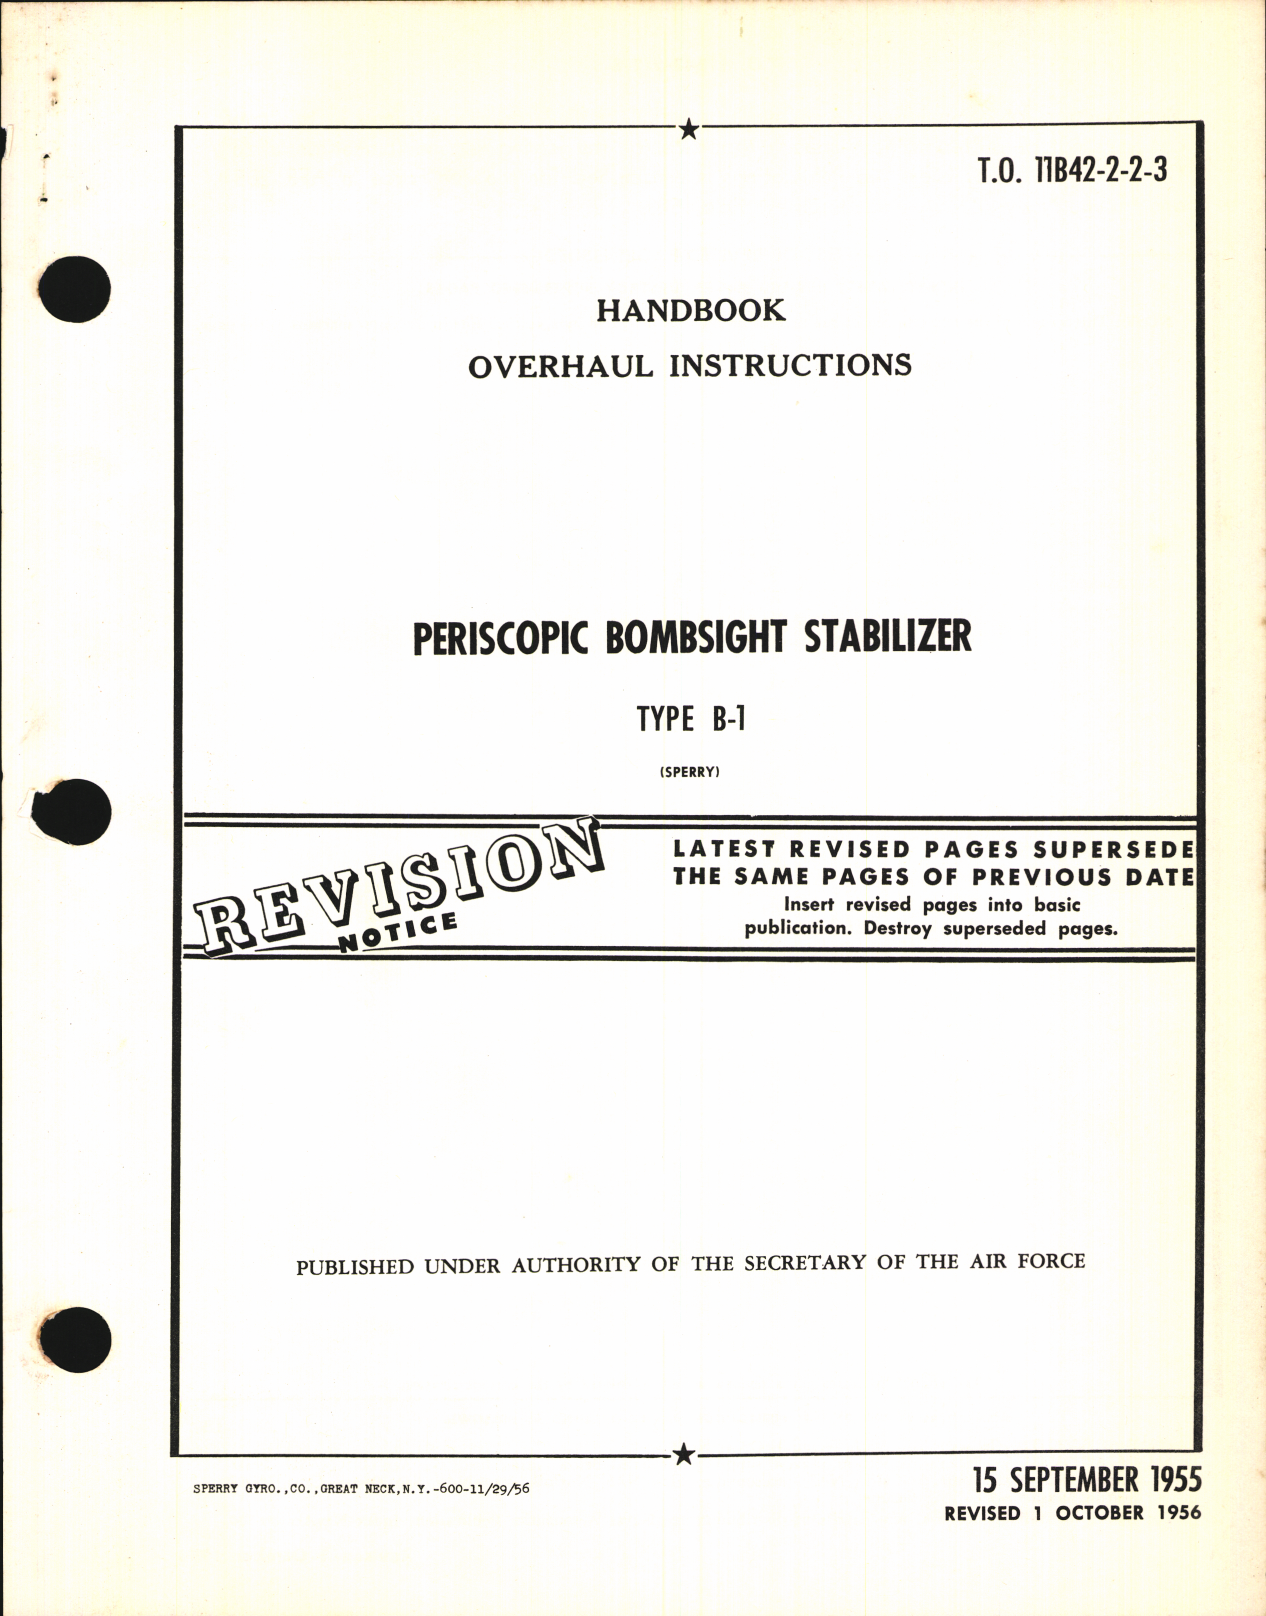 Sample page 1 from AirCorps Library document: Overhaul Instructions for Periscopic Bombsight Stabilizer Type B-1